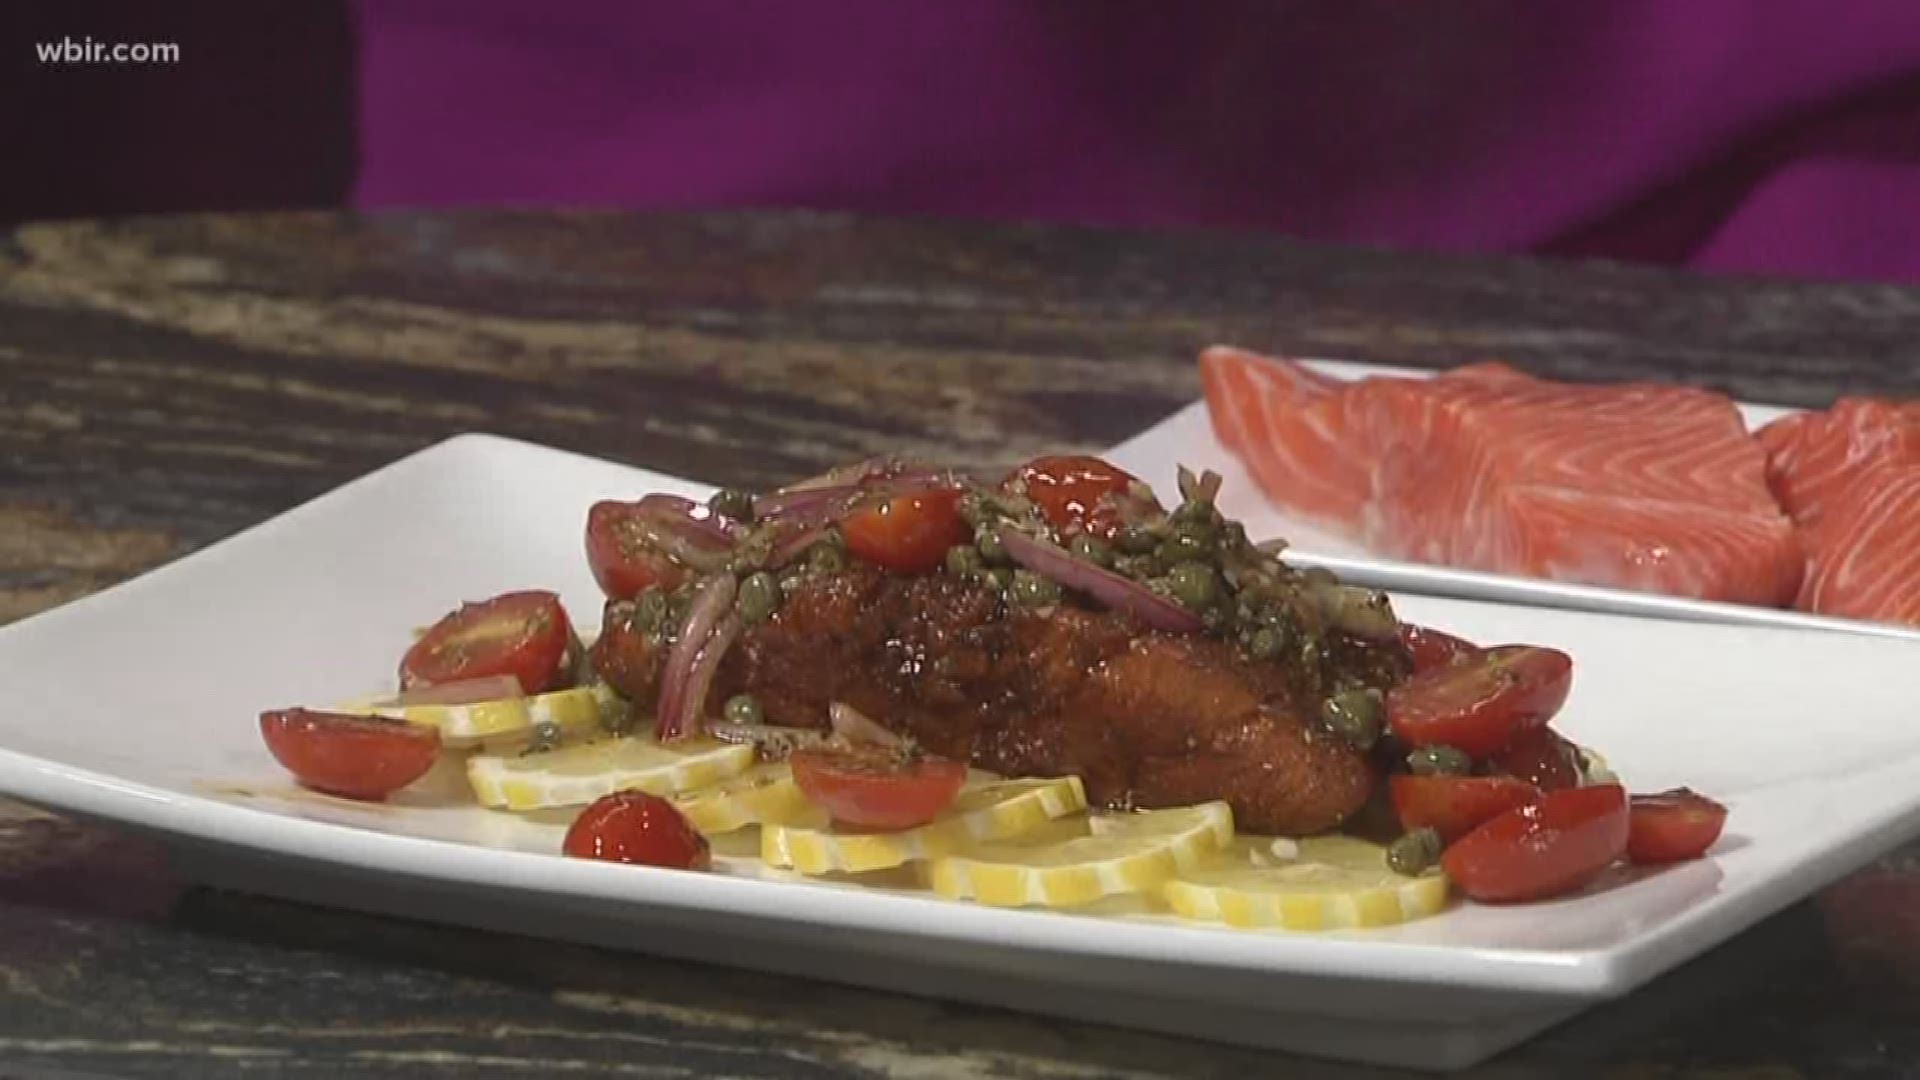 Chef Gary Nicely from Naples Italian is in the kitchen making a delicious trout dish.